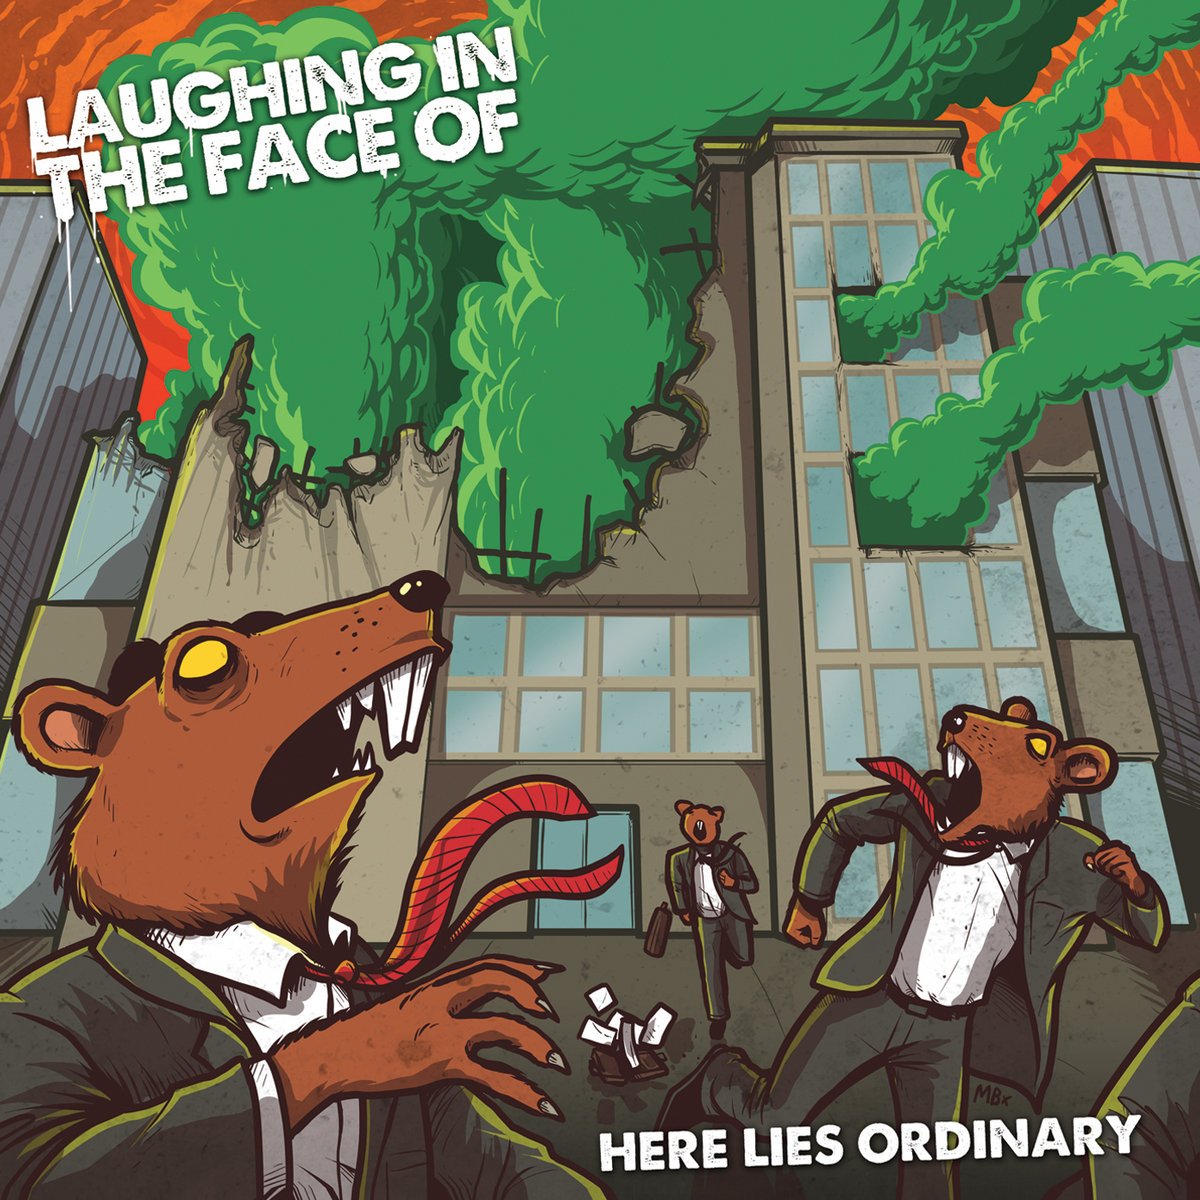 Laughing In The Face Of - Here Lies Ordinary